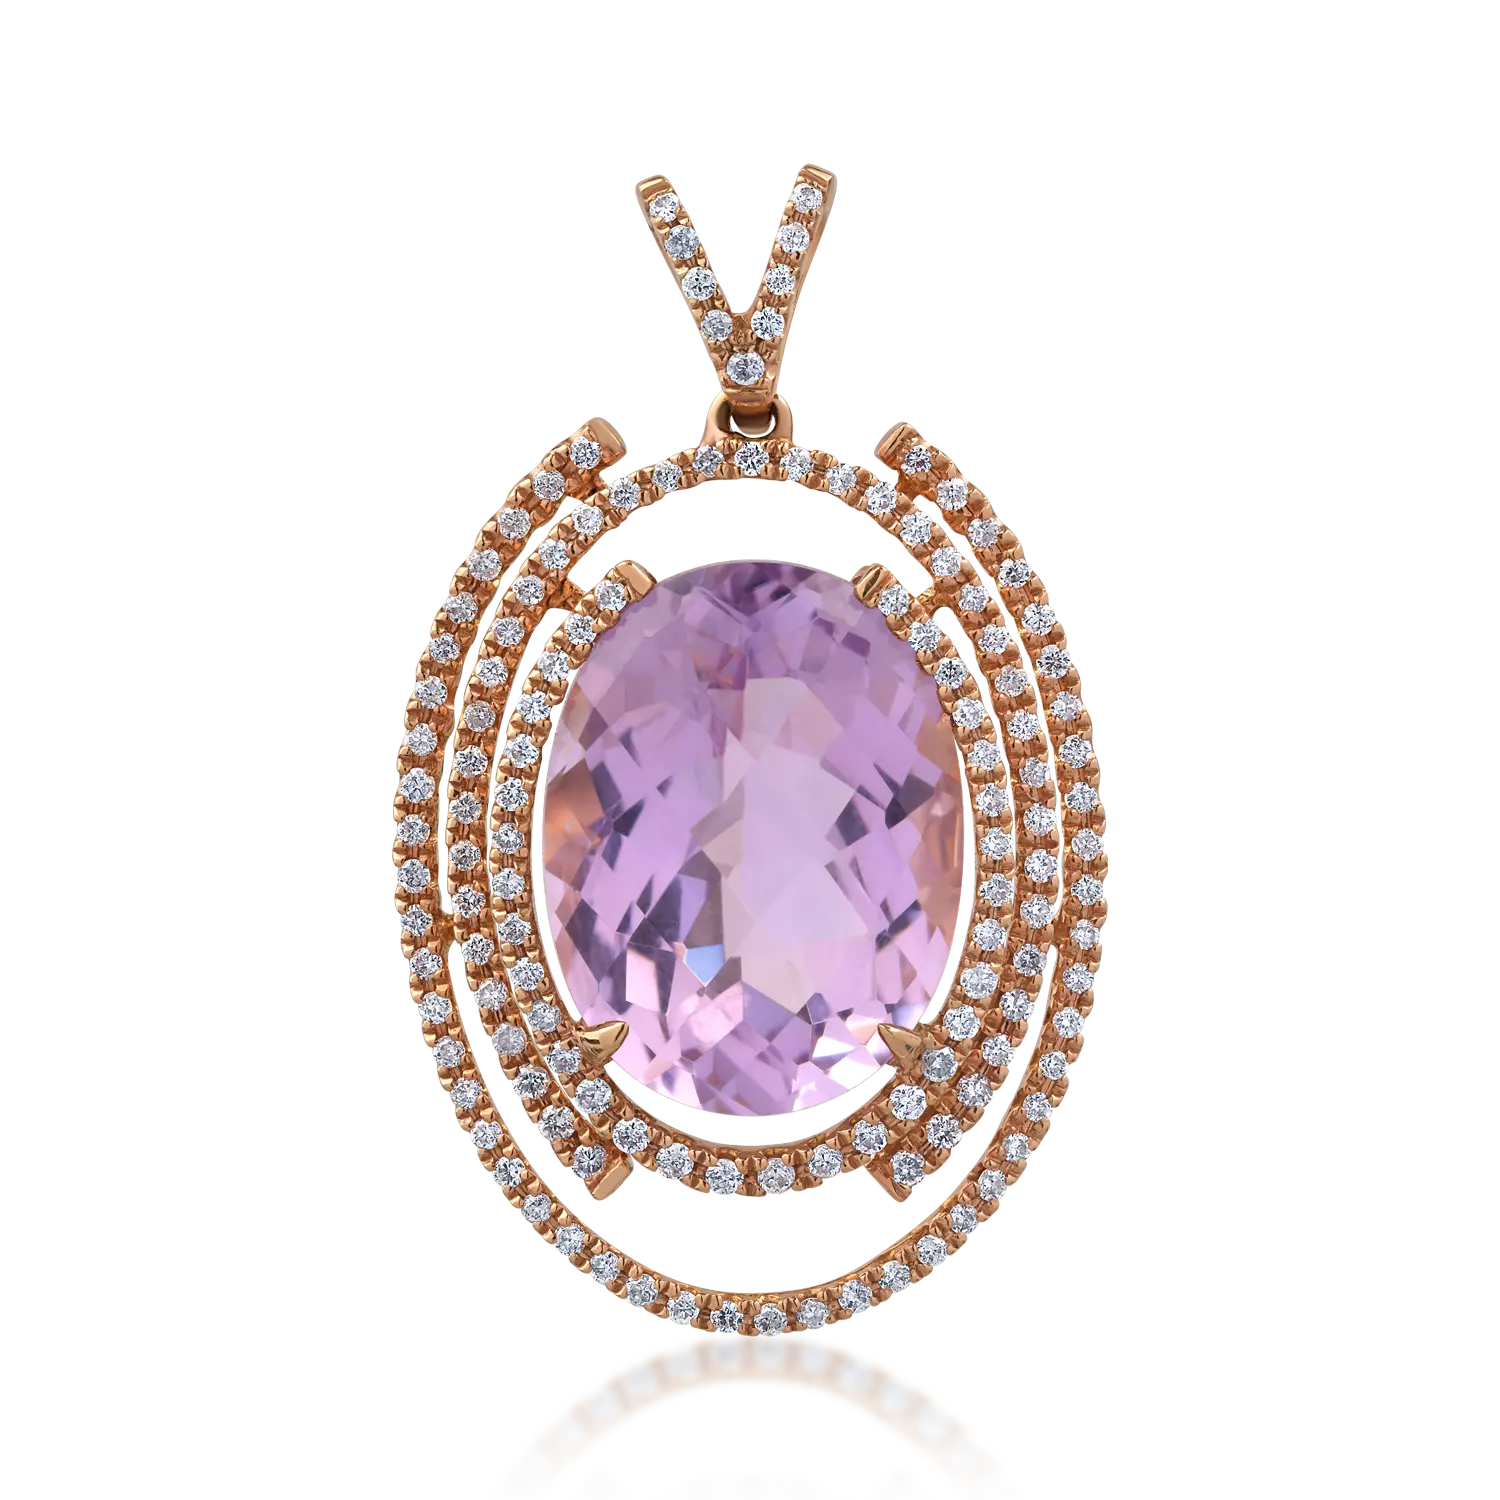 18K rose gold pendant with 9.2ct pink amethyst and 0.55ct diamonds